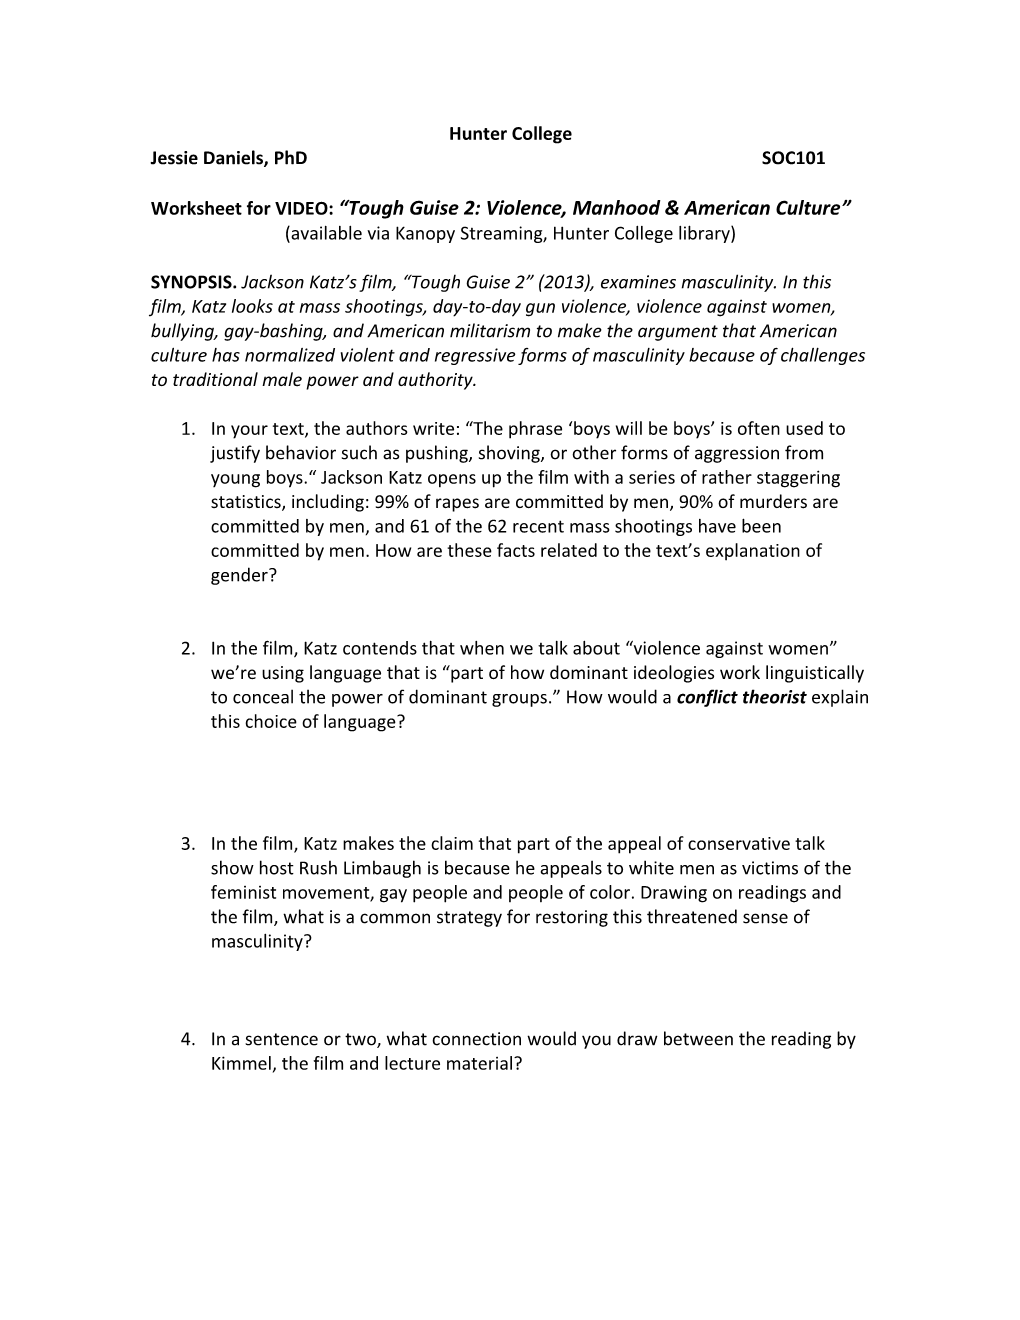 Worksheet for VIDEO: Tough Guise 2: Violence, Manhood & American Culture